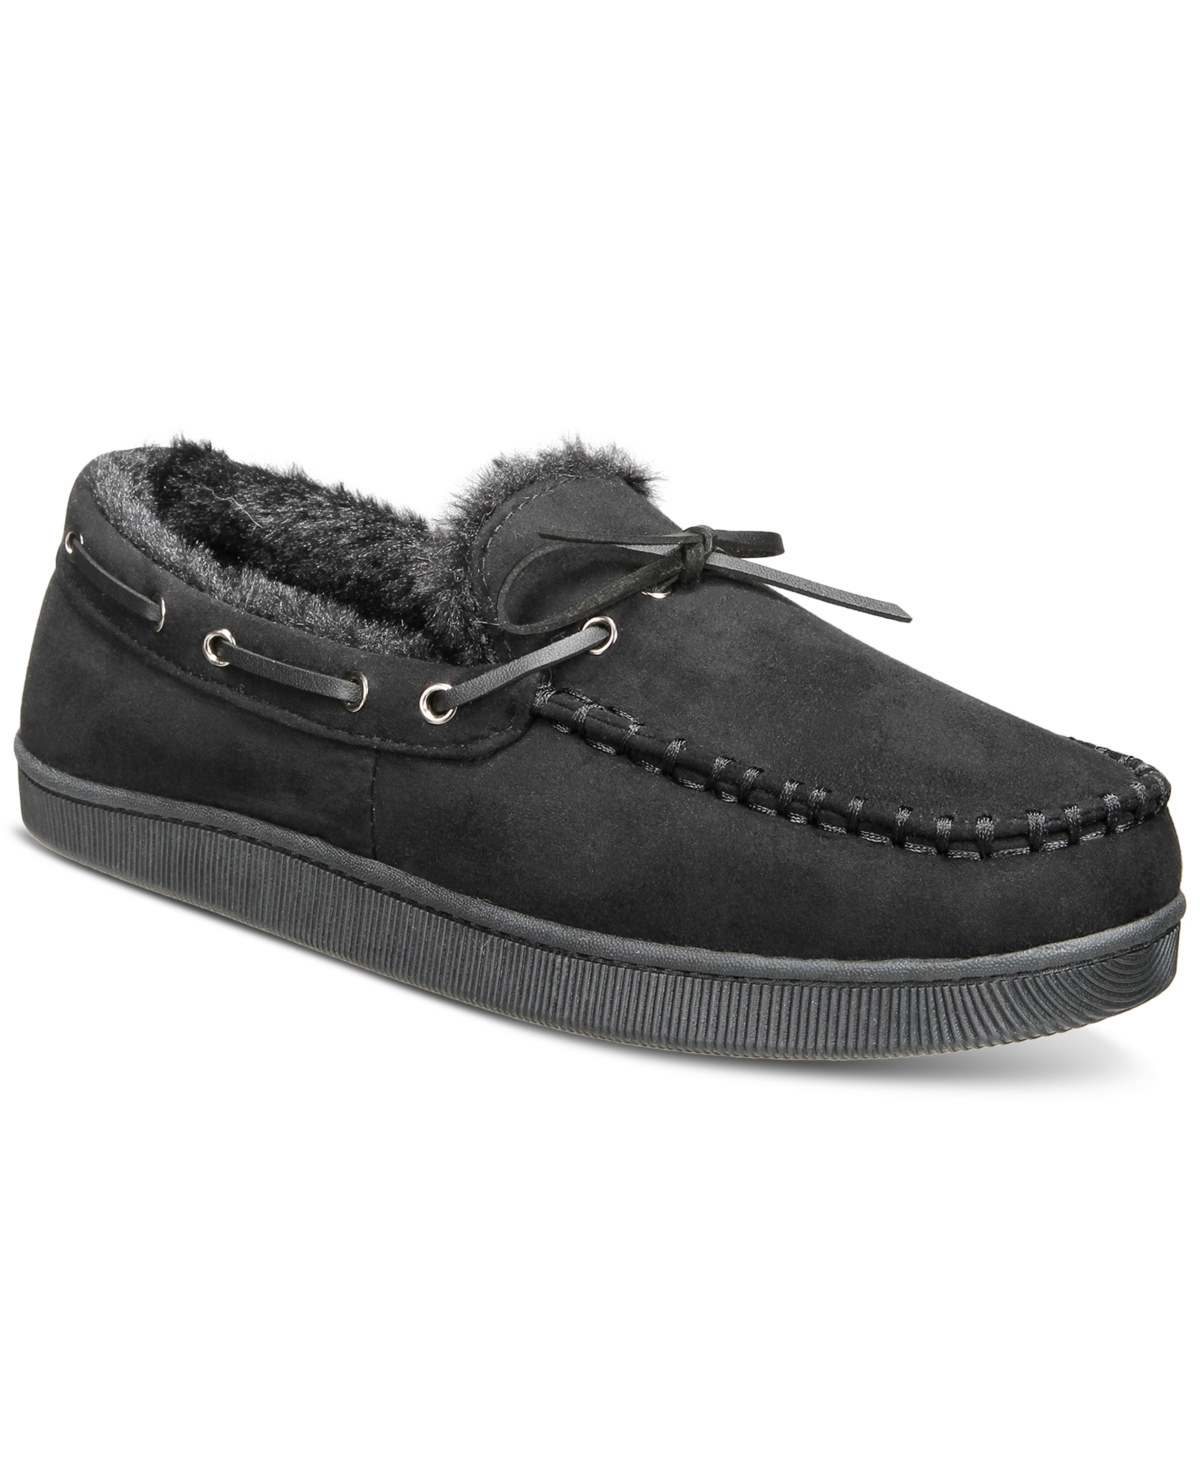 Men's Faux-Suede Moccasin Slippers with Faux-Fur Lining, Created for Macy's - Tan